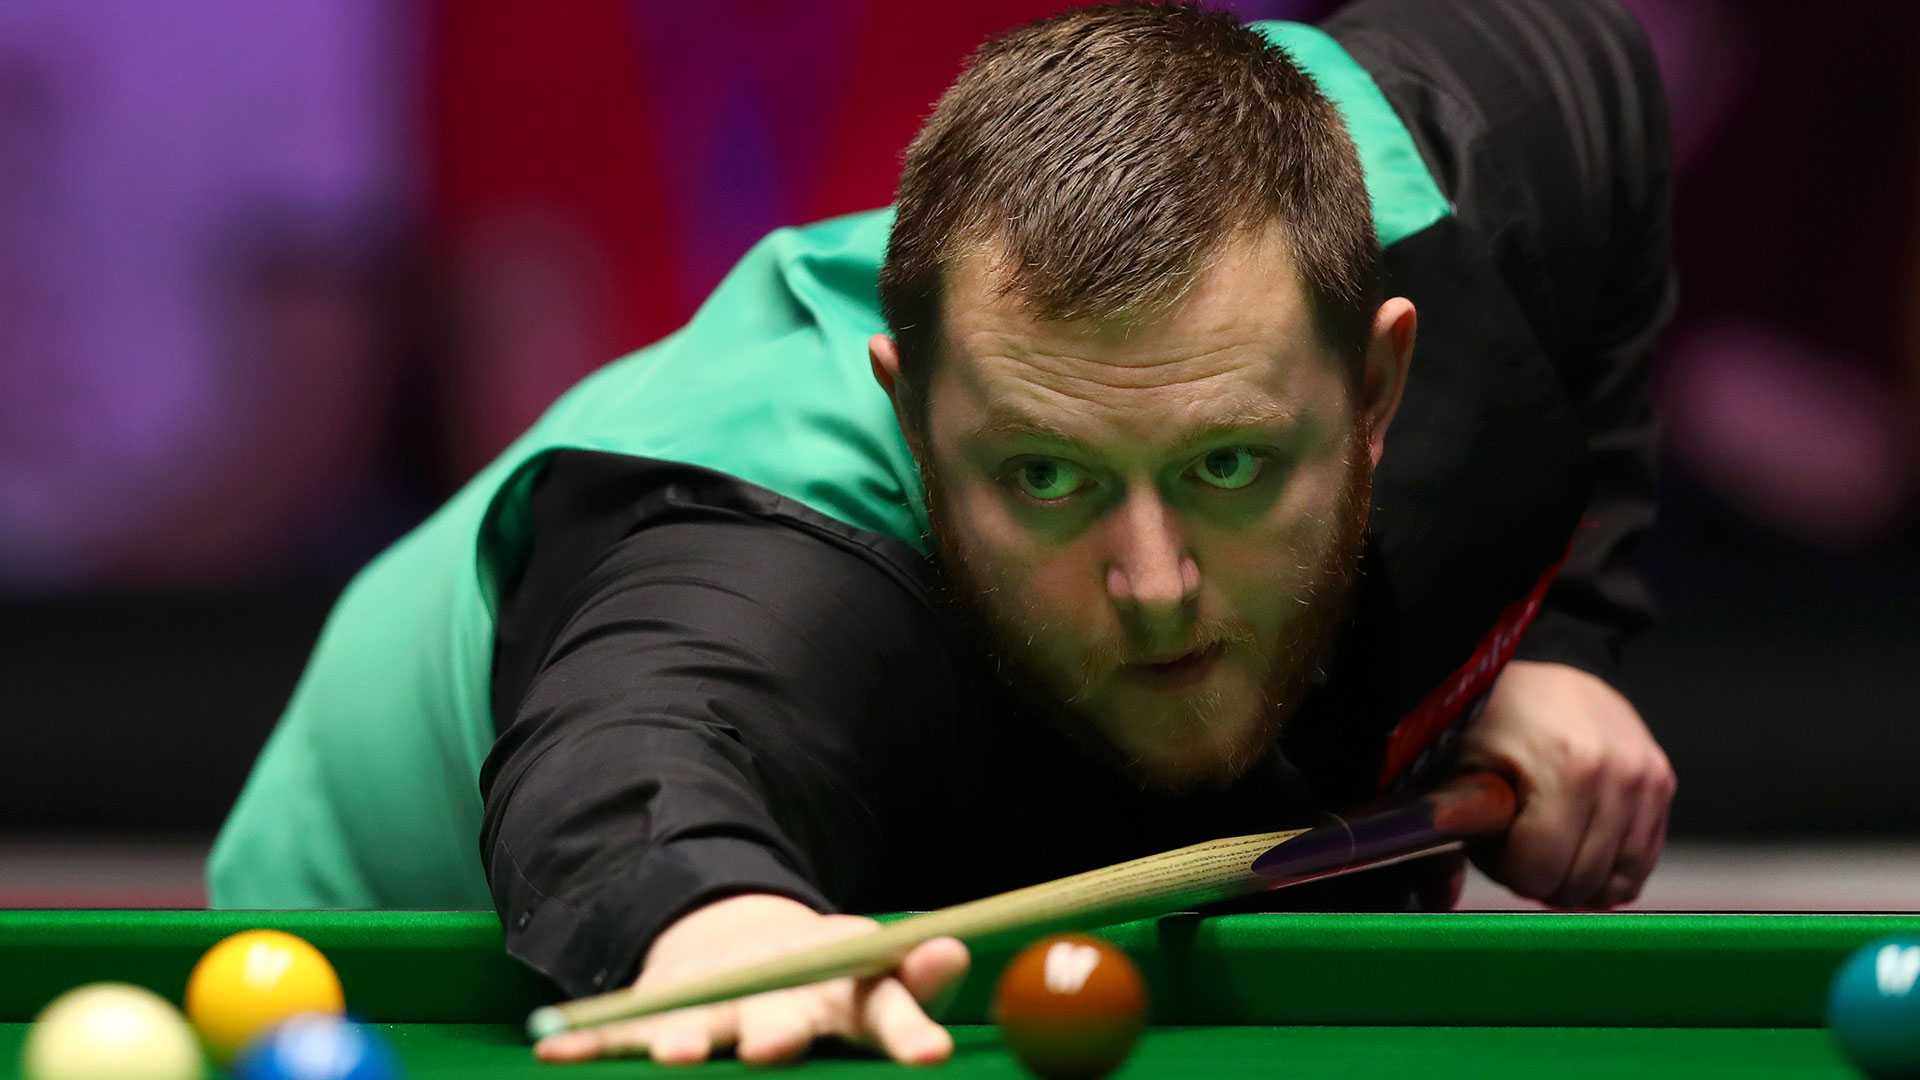 European Masters snooker results and report Mark Allen trounces Ken Doherty 4-0; Mark Williams crashes out